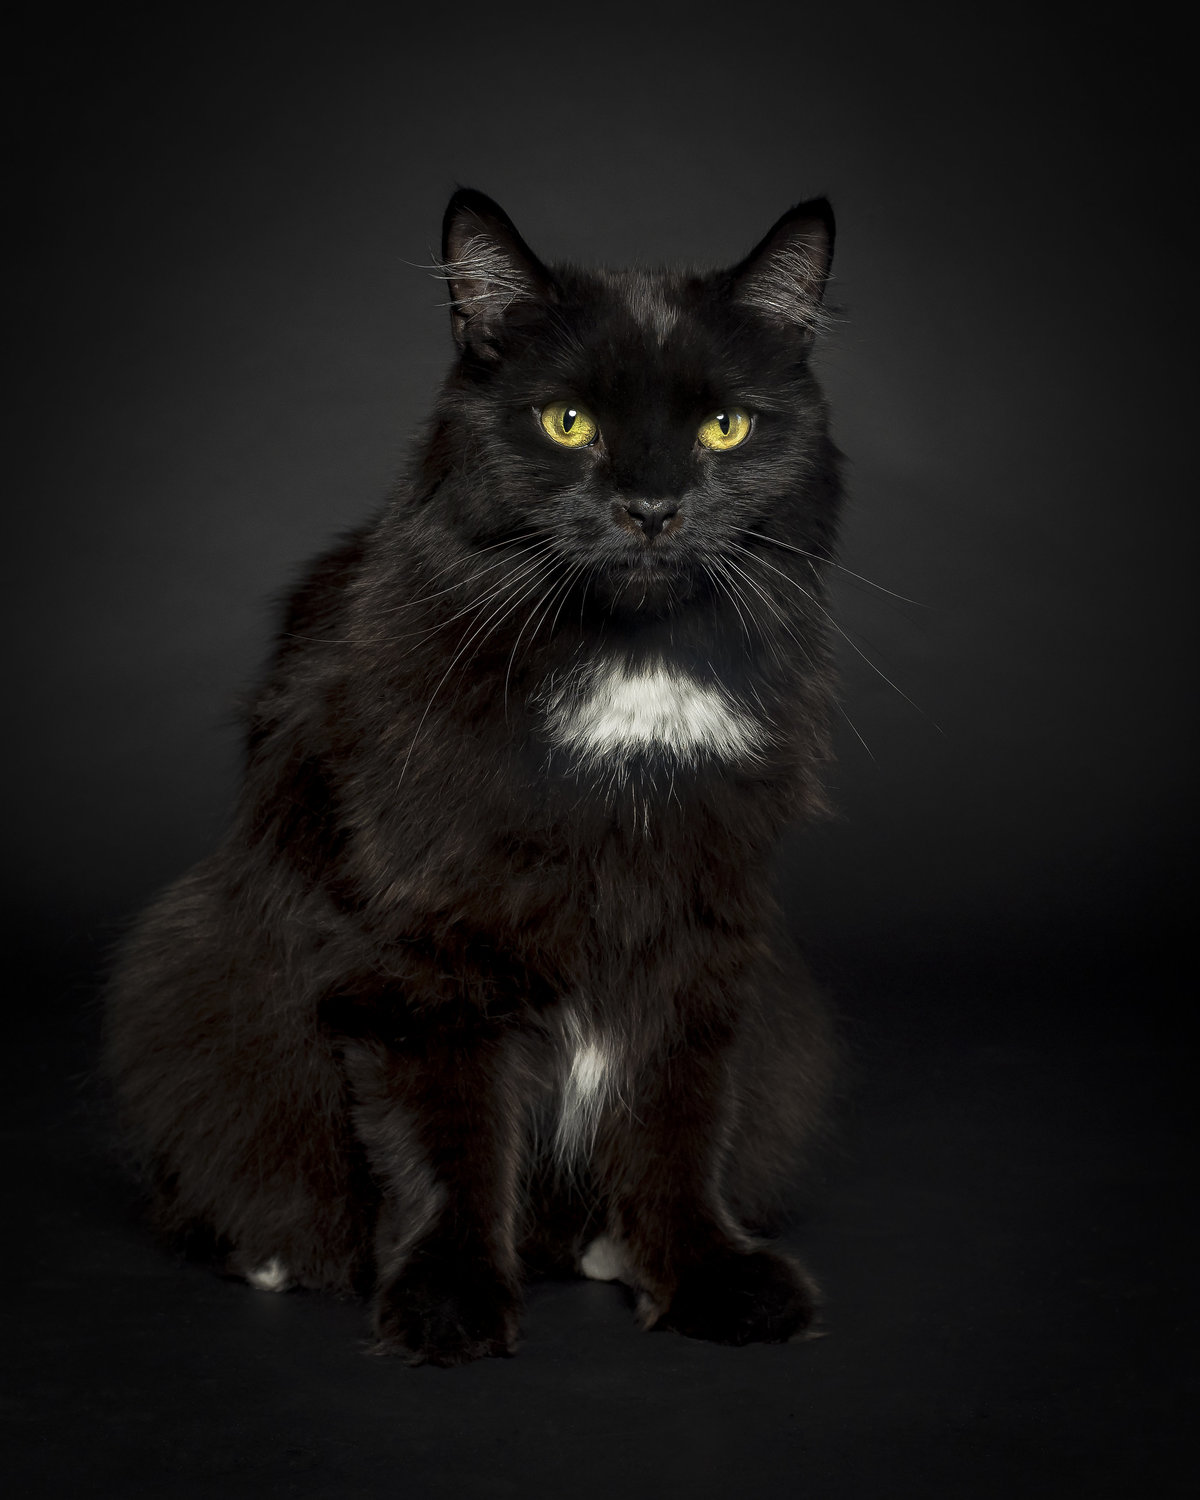 Black cat on a black background with gold eyes and white chest